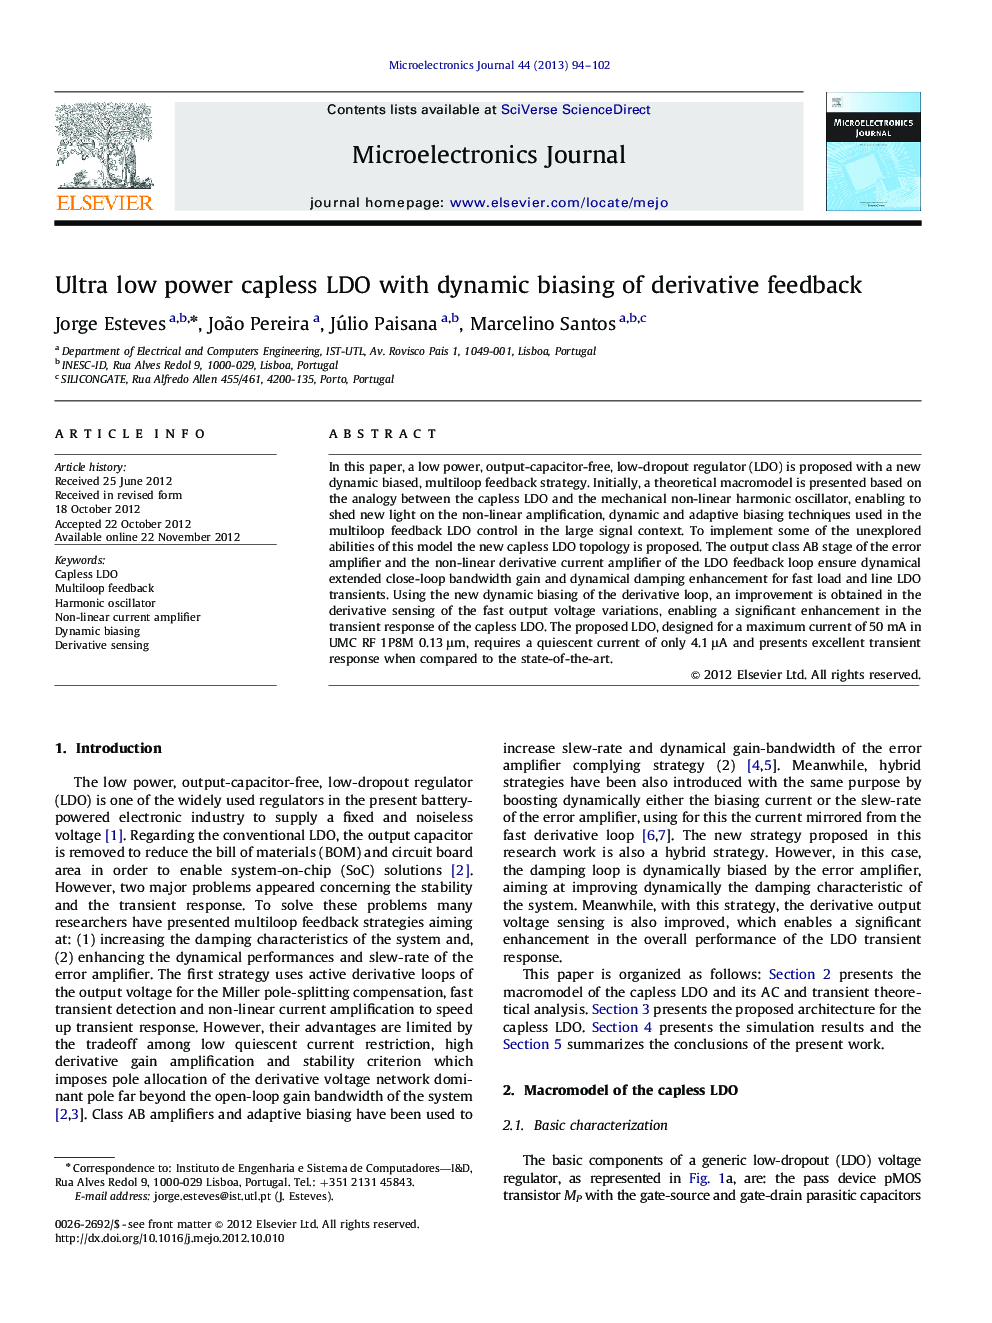 Ultra low power capless LDO with dynamic biasing of derivative feedback